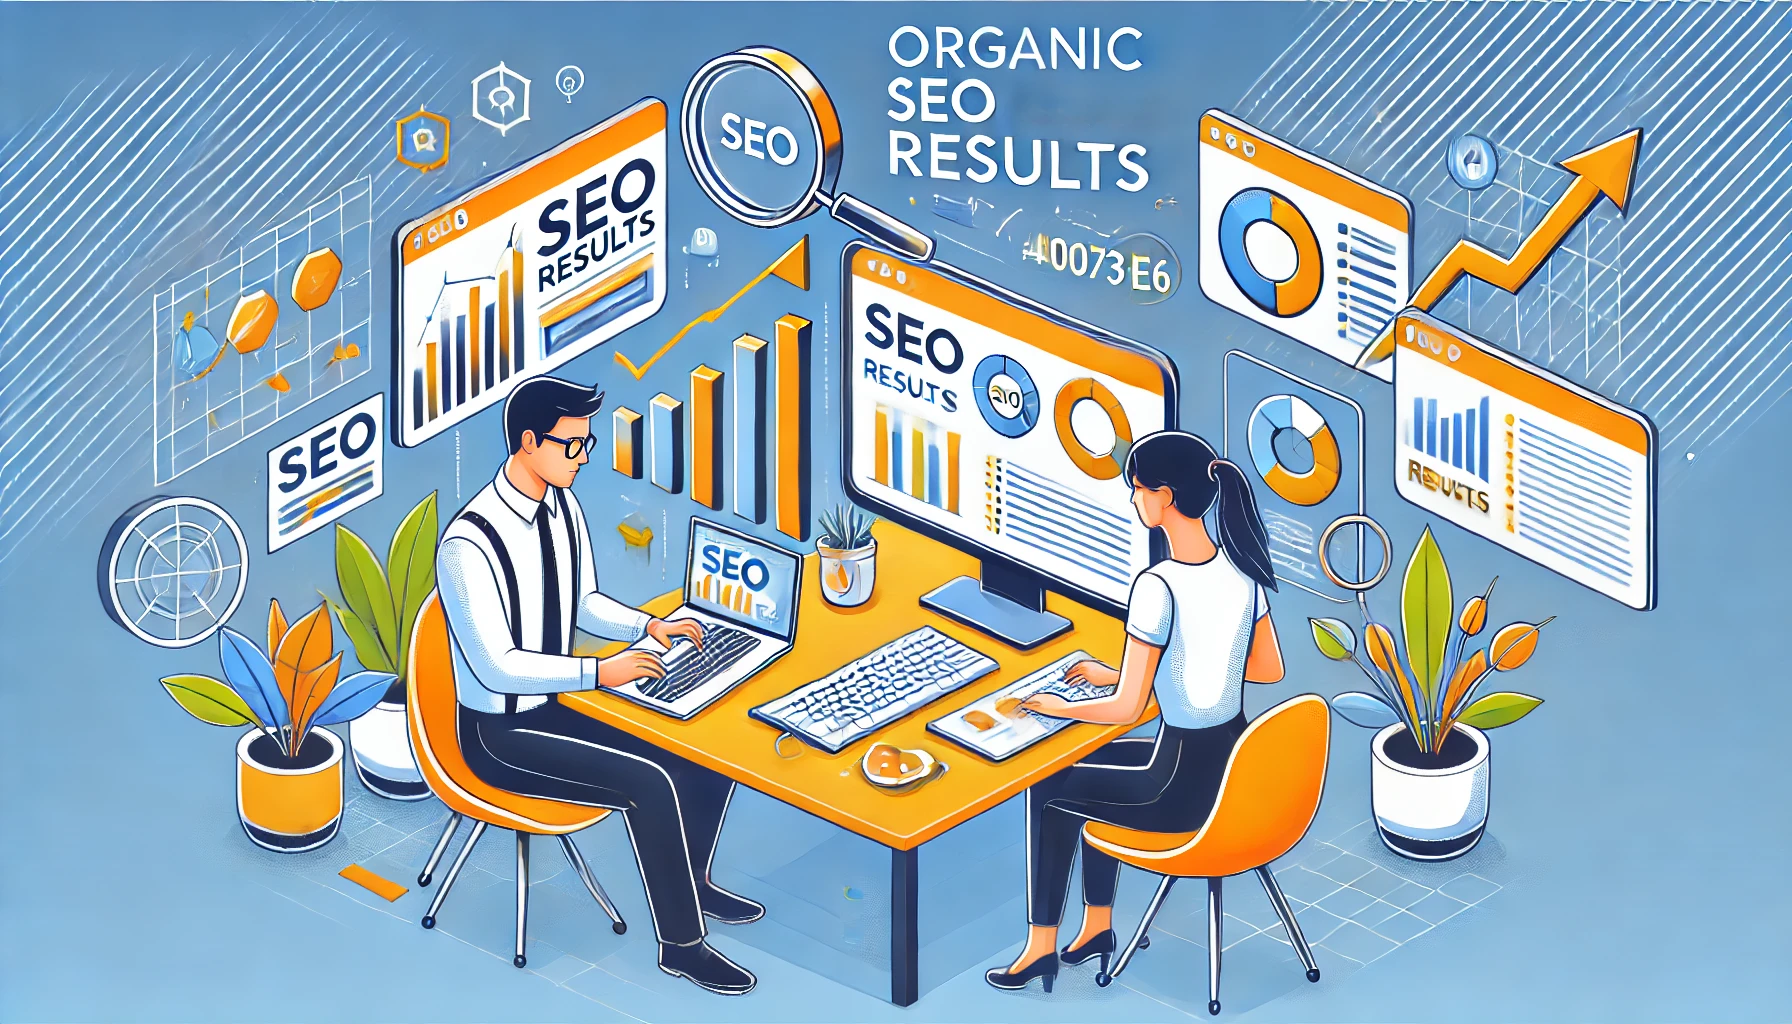 DALL·E 2024 07 07 18.06.43 Create a simple and eye catching image for Organic SEO Results featuring a technology theme. Include a professional man and woman working together o